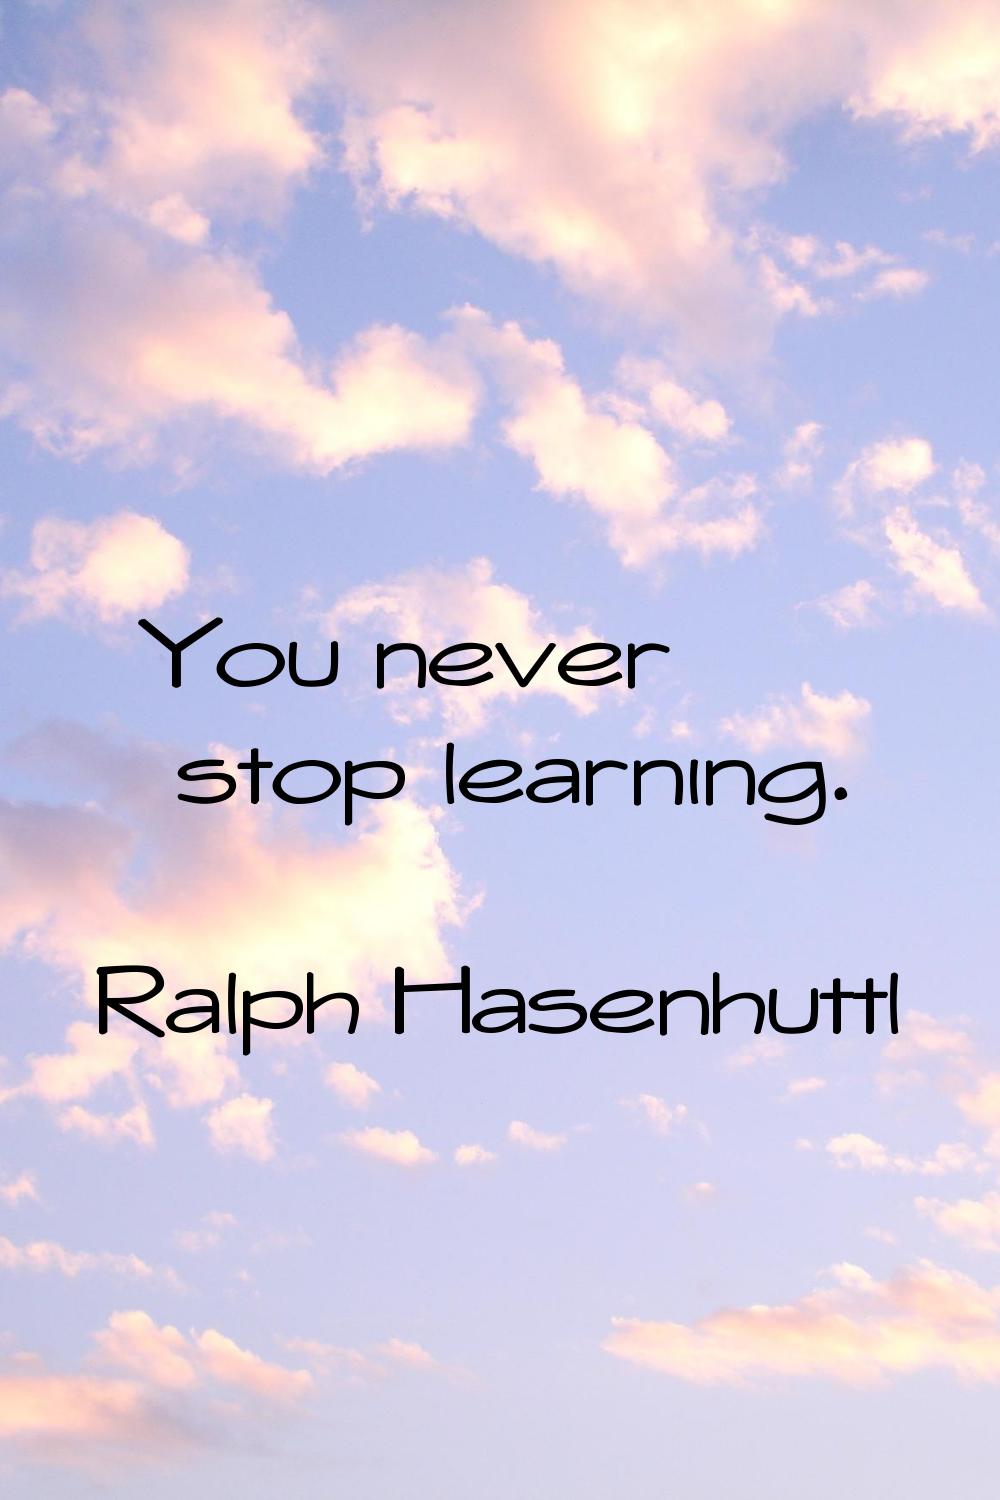 You never stop learning.